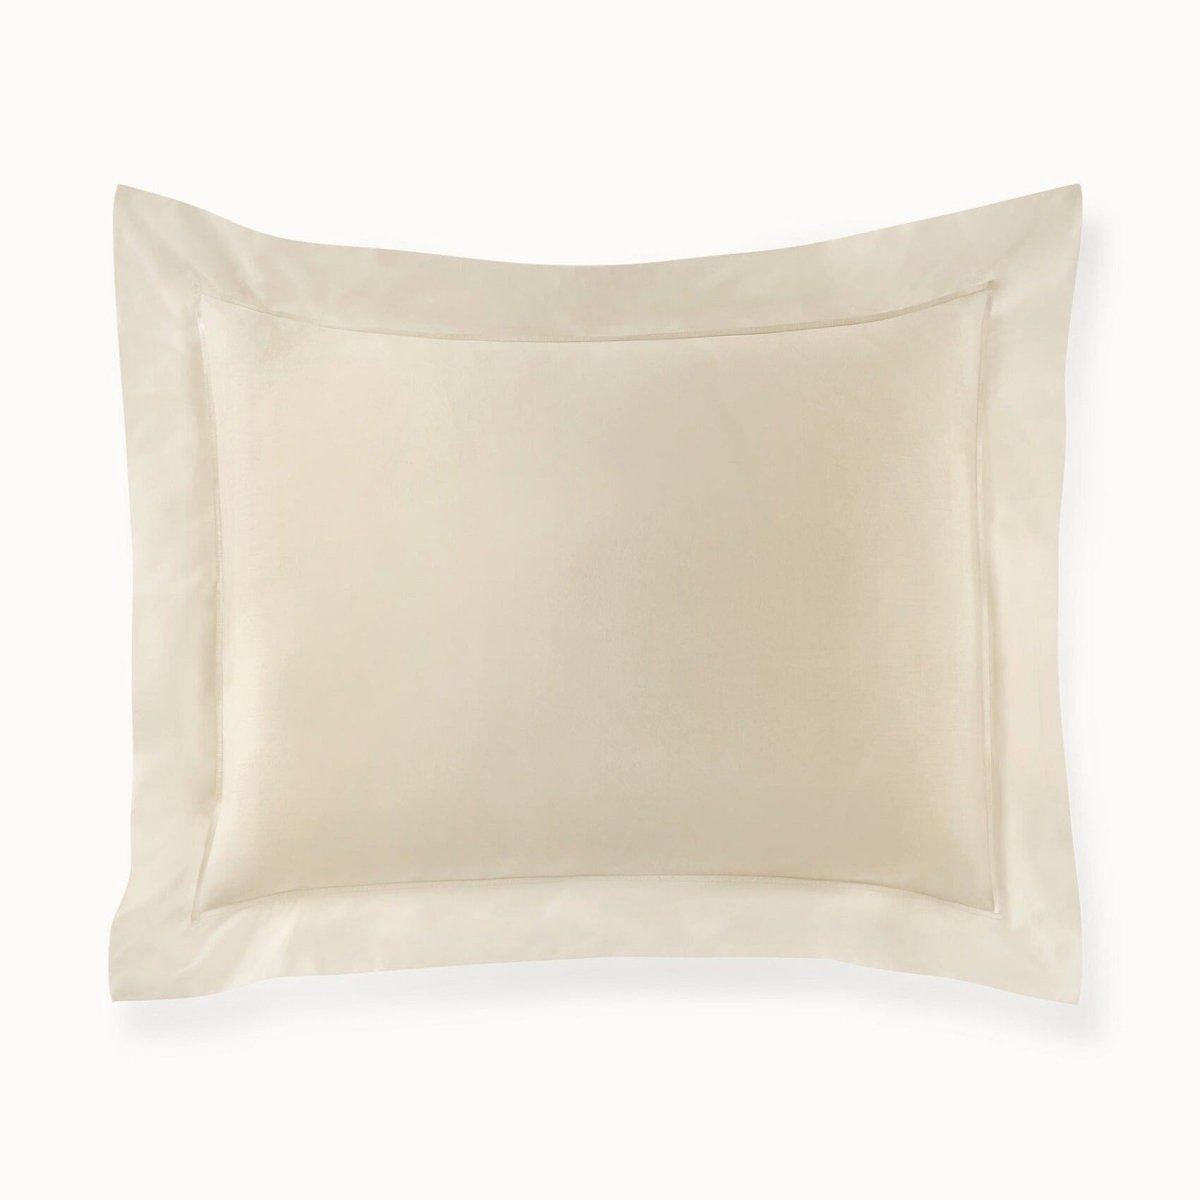 Pillow Sham Cover - Soprano Linen Bedding - Peacock Alley Cotton Sateen at Fig Linens and Home